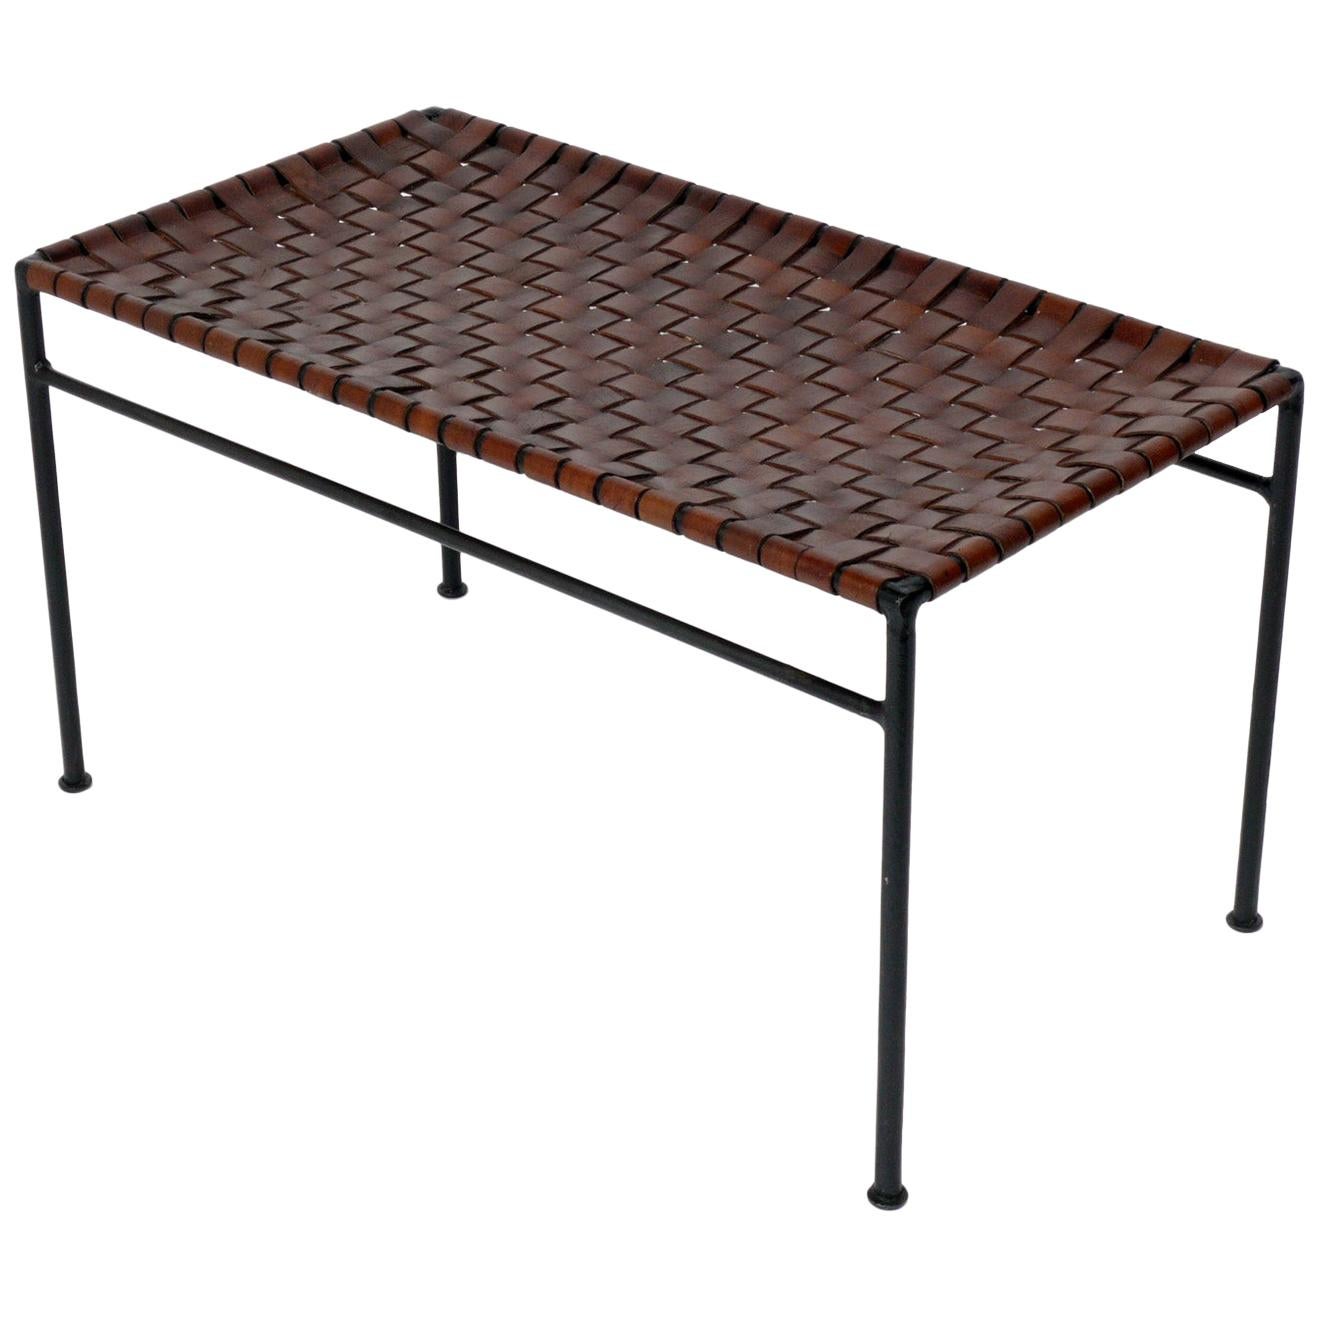 Iron and Woven Leather Strap Bench in the manner of Swift and Monell